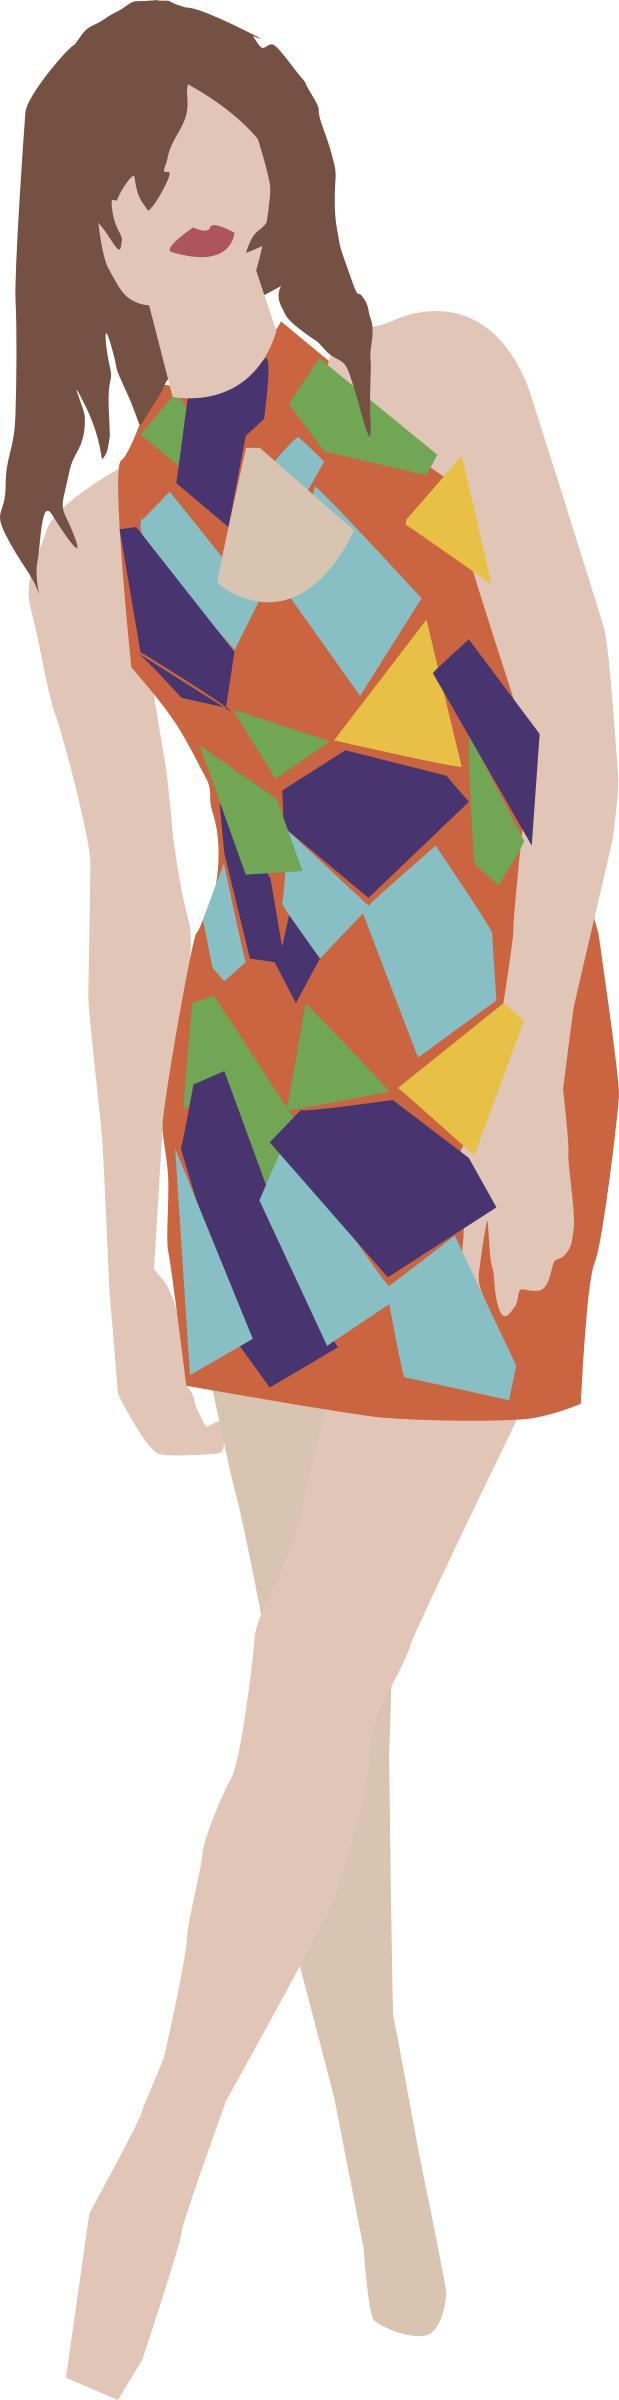 Girl in a dress. png transparent